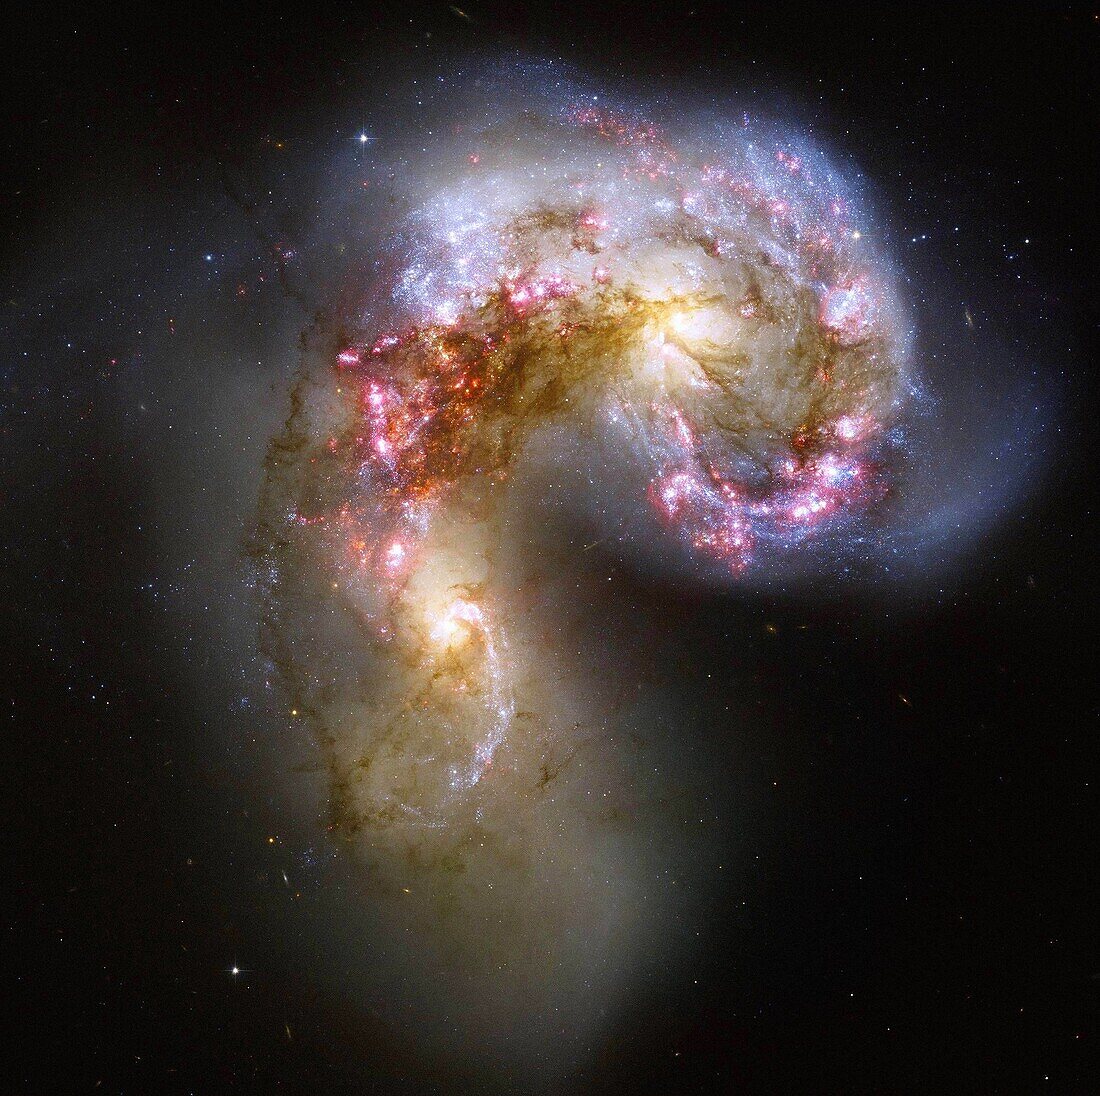 This image of the Antennae galaxies is the sharpest yet of this merging pair of galaxies  During the course of the collision, billions of stars will be formed  The brightest and most compact of these star birth regions are called super star clusters   The